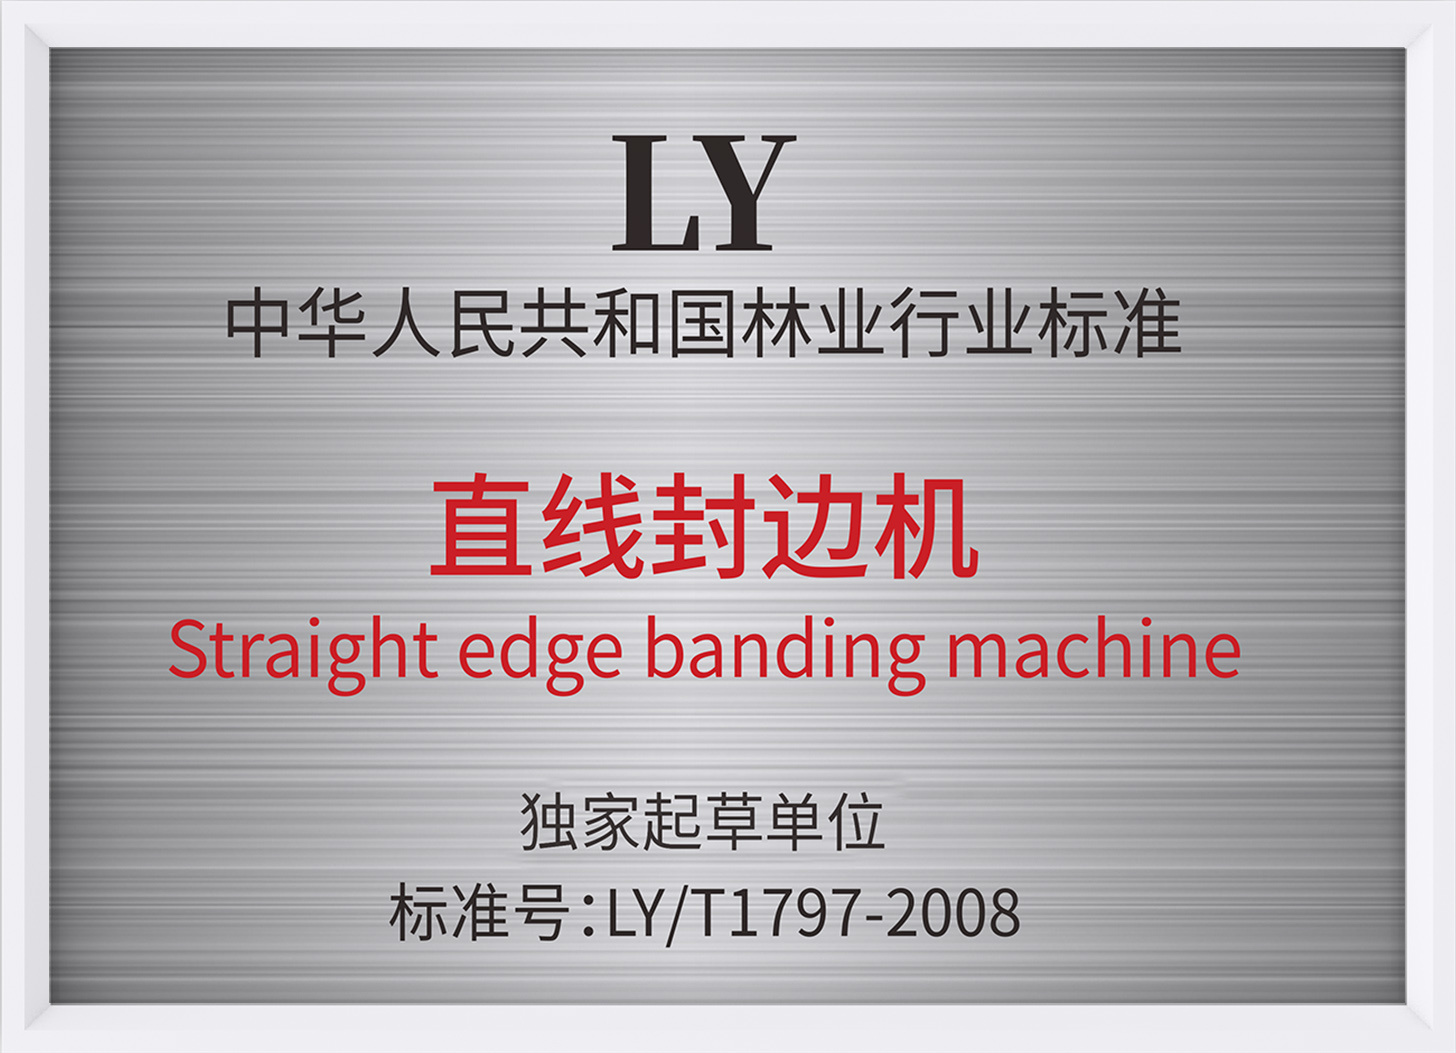 Forestry Industry Standard: Linear Edge Banding Machine